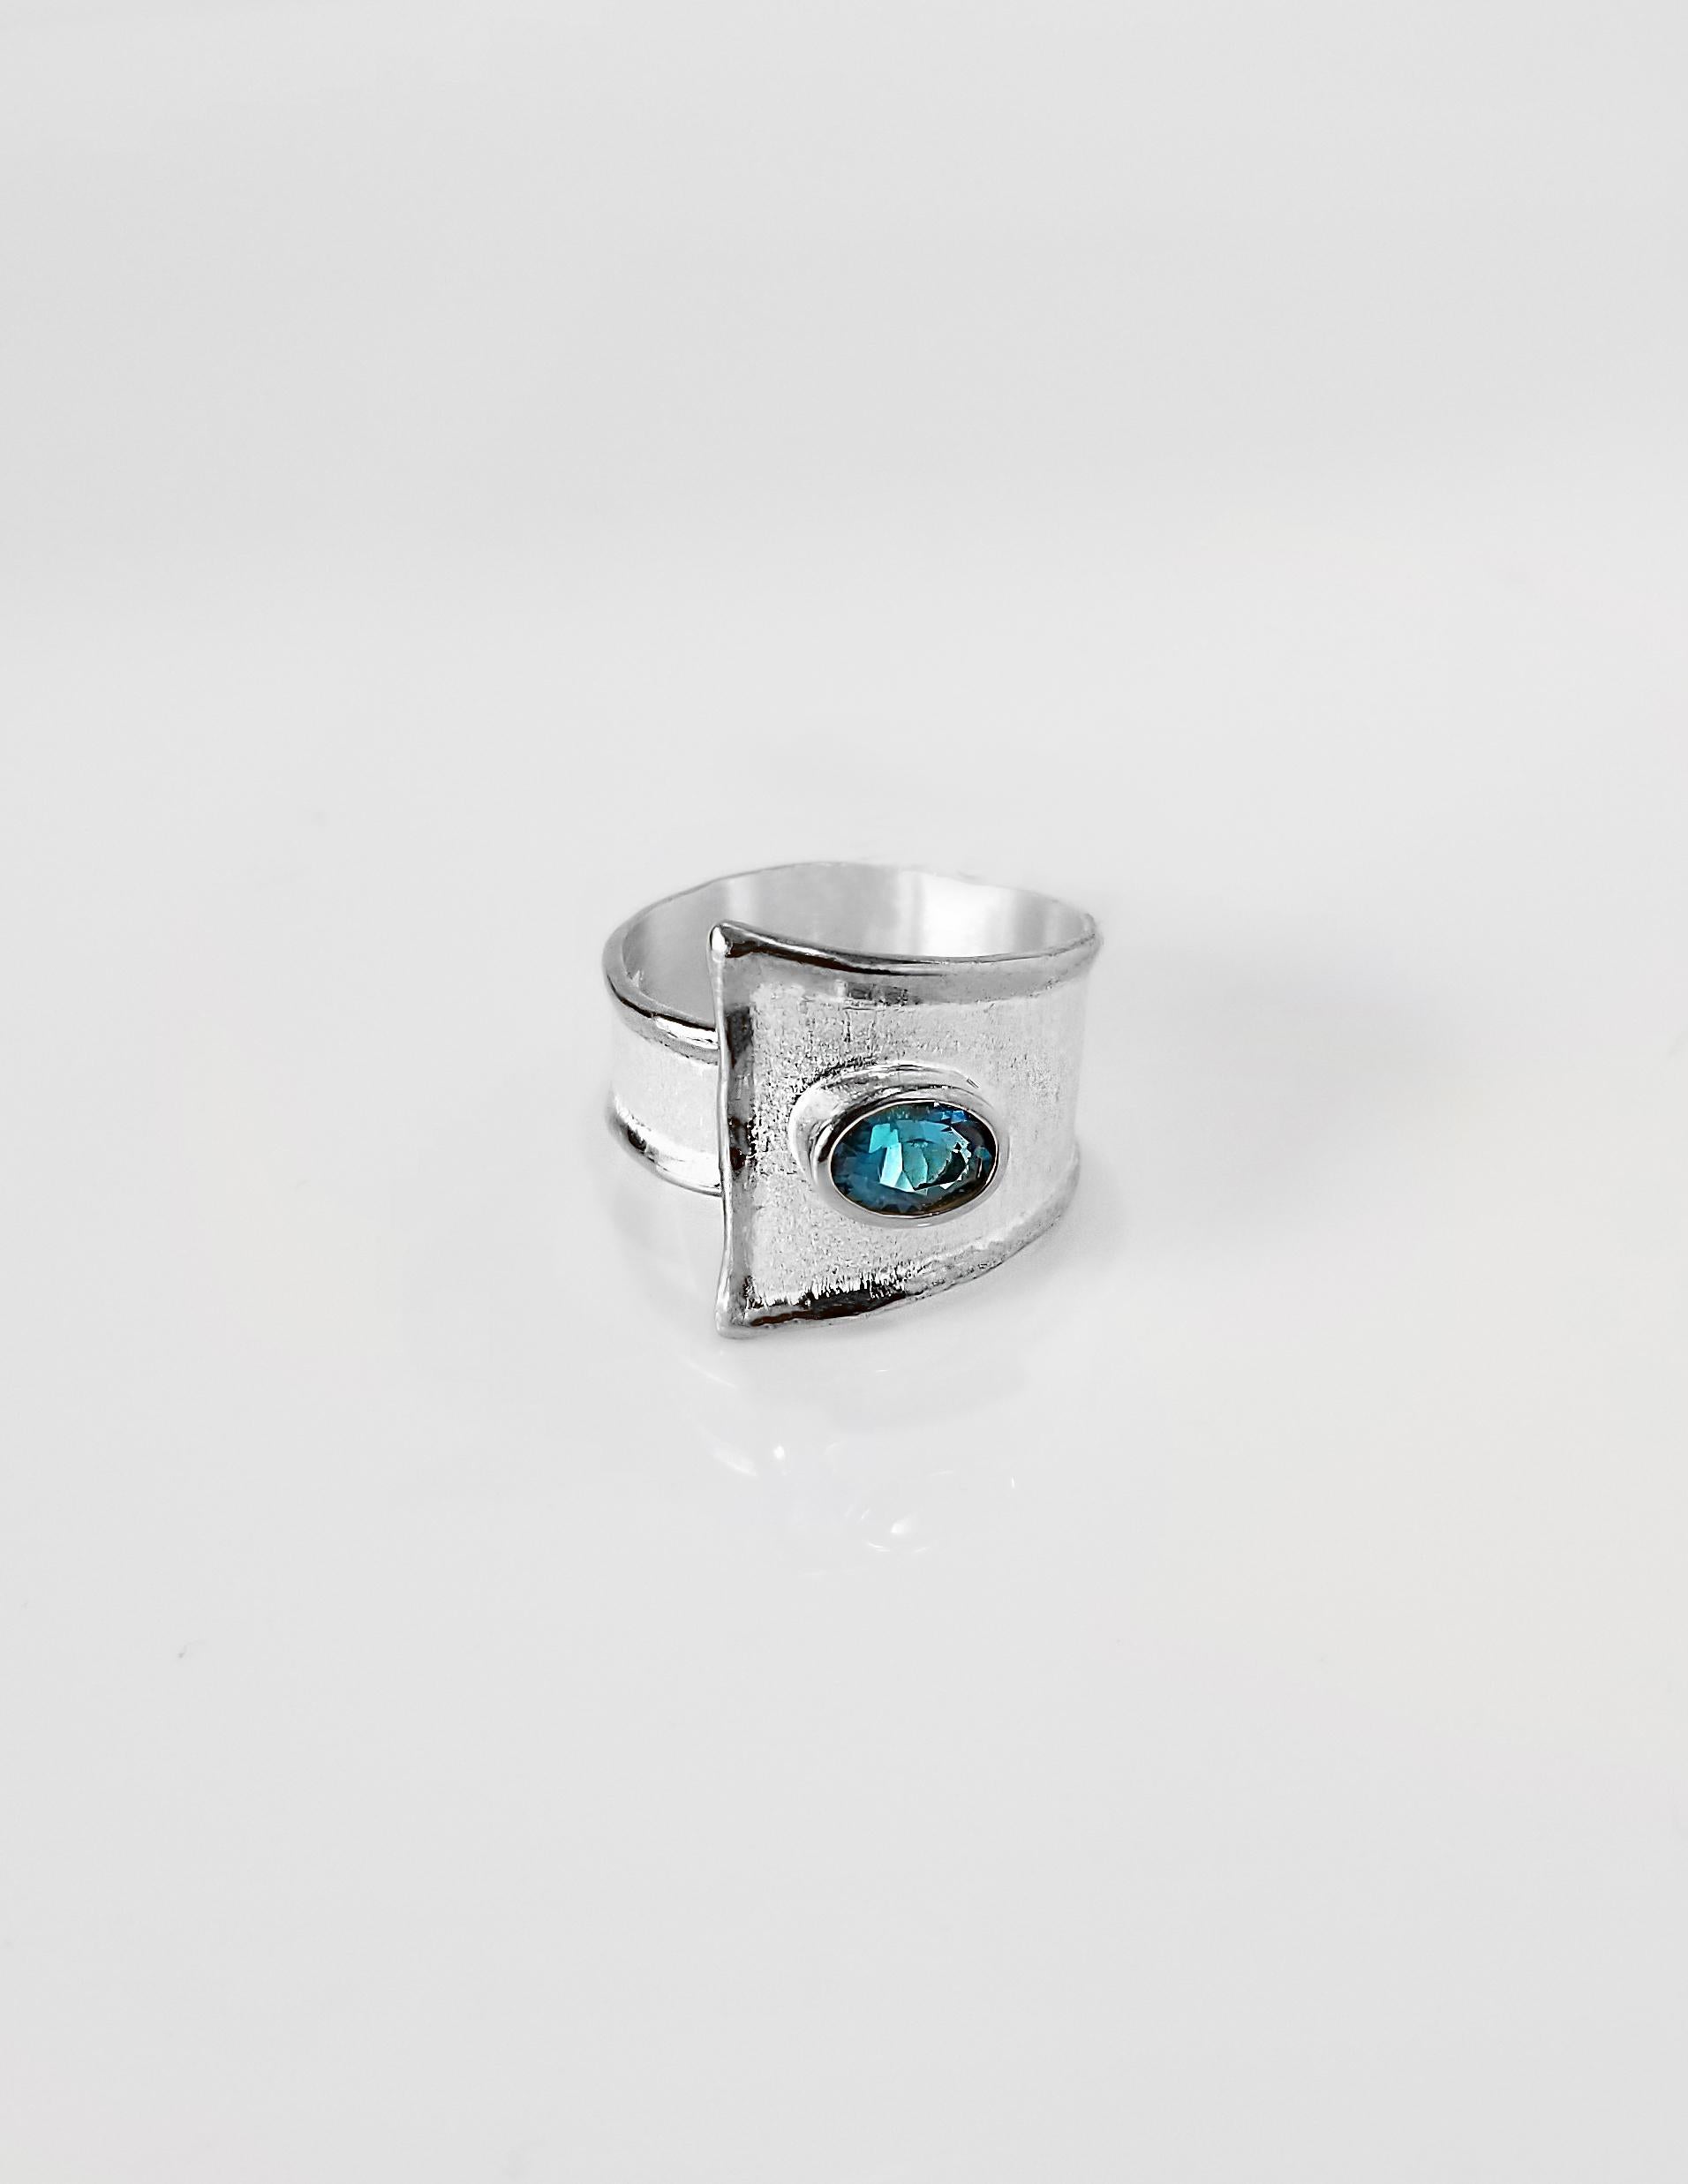 Yianni Creations Ammos Collection 100% Handmade Artisan Ring from Fine Silver featuring 1.60 Carat natural London Blue Topaz complemented by unique techniques of craftsmanship - brushed texture and nature-inspired liquid edges. The core of this